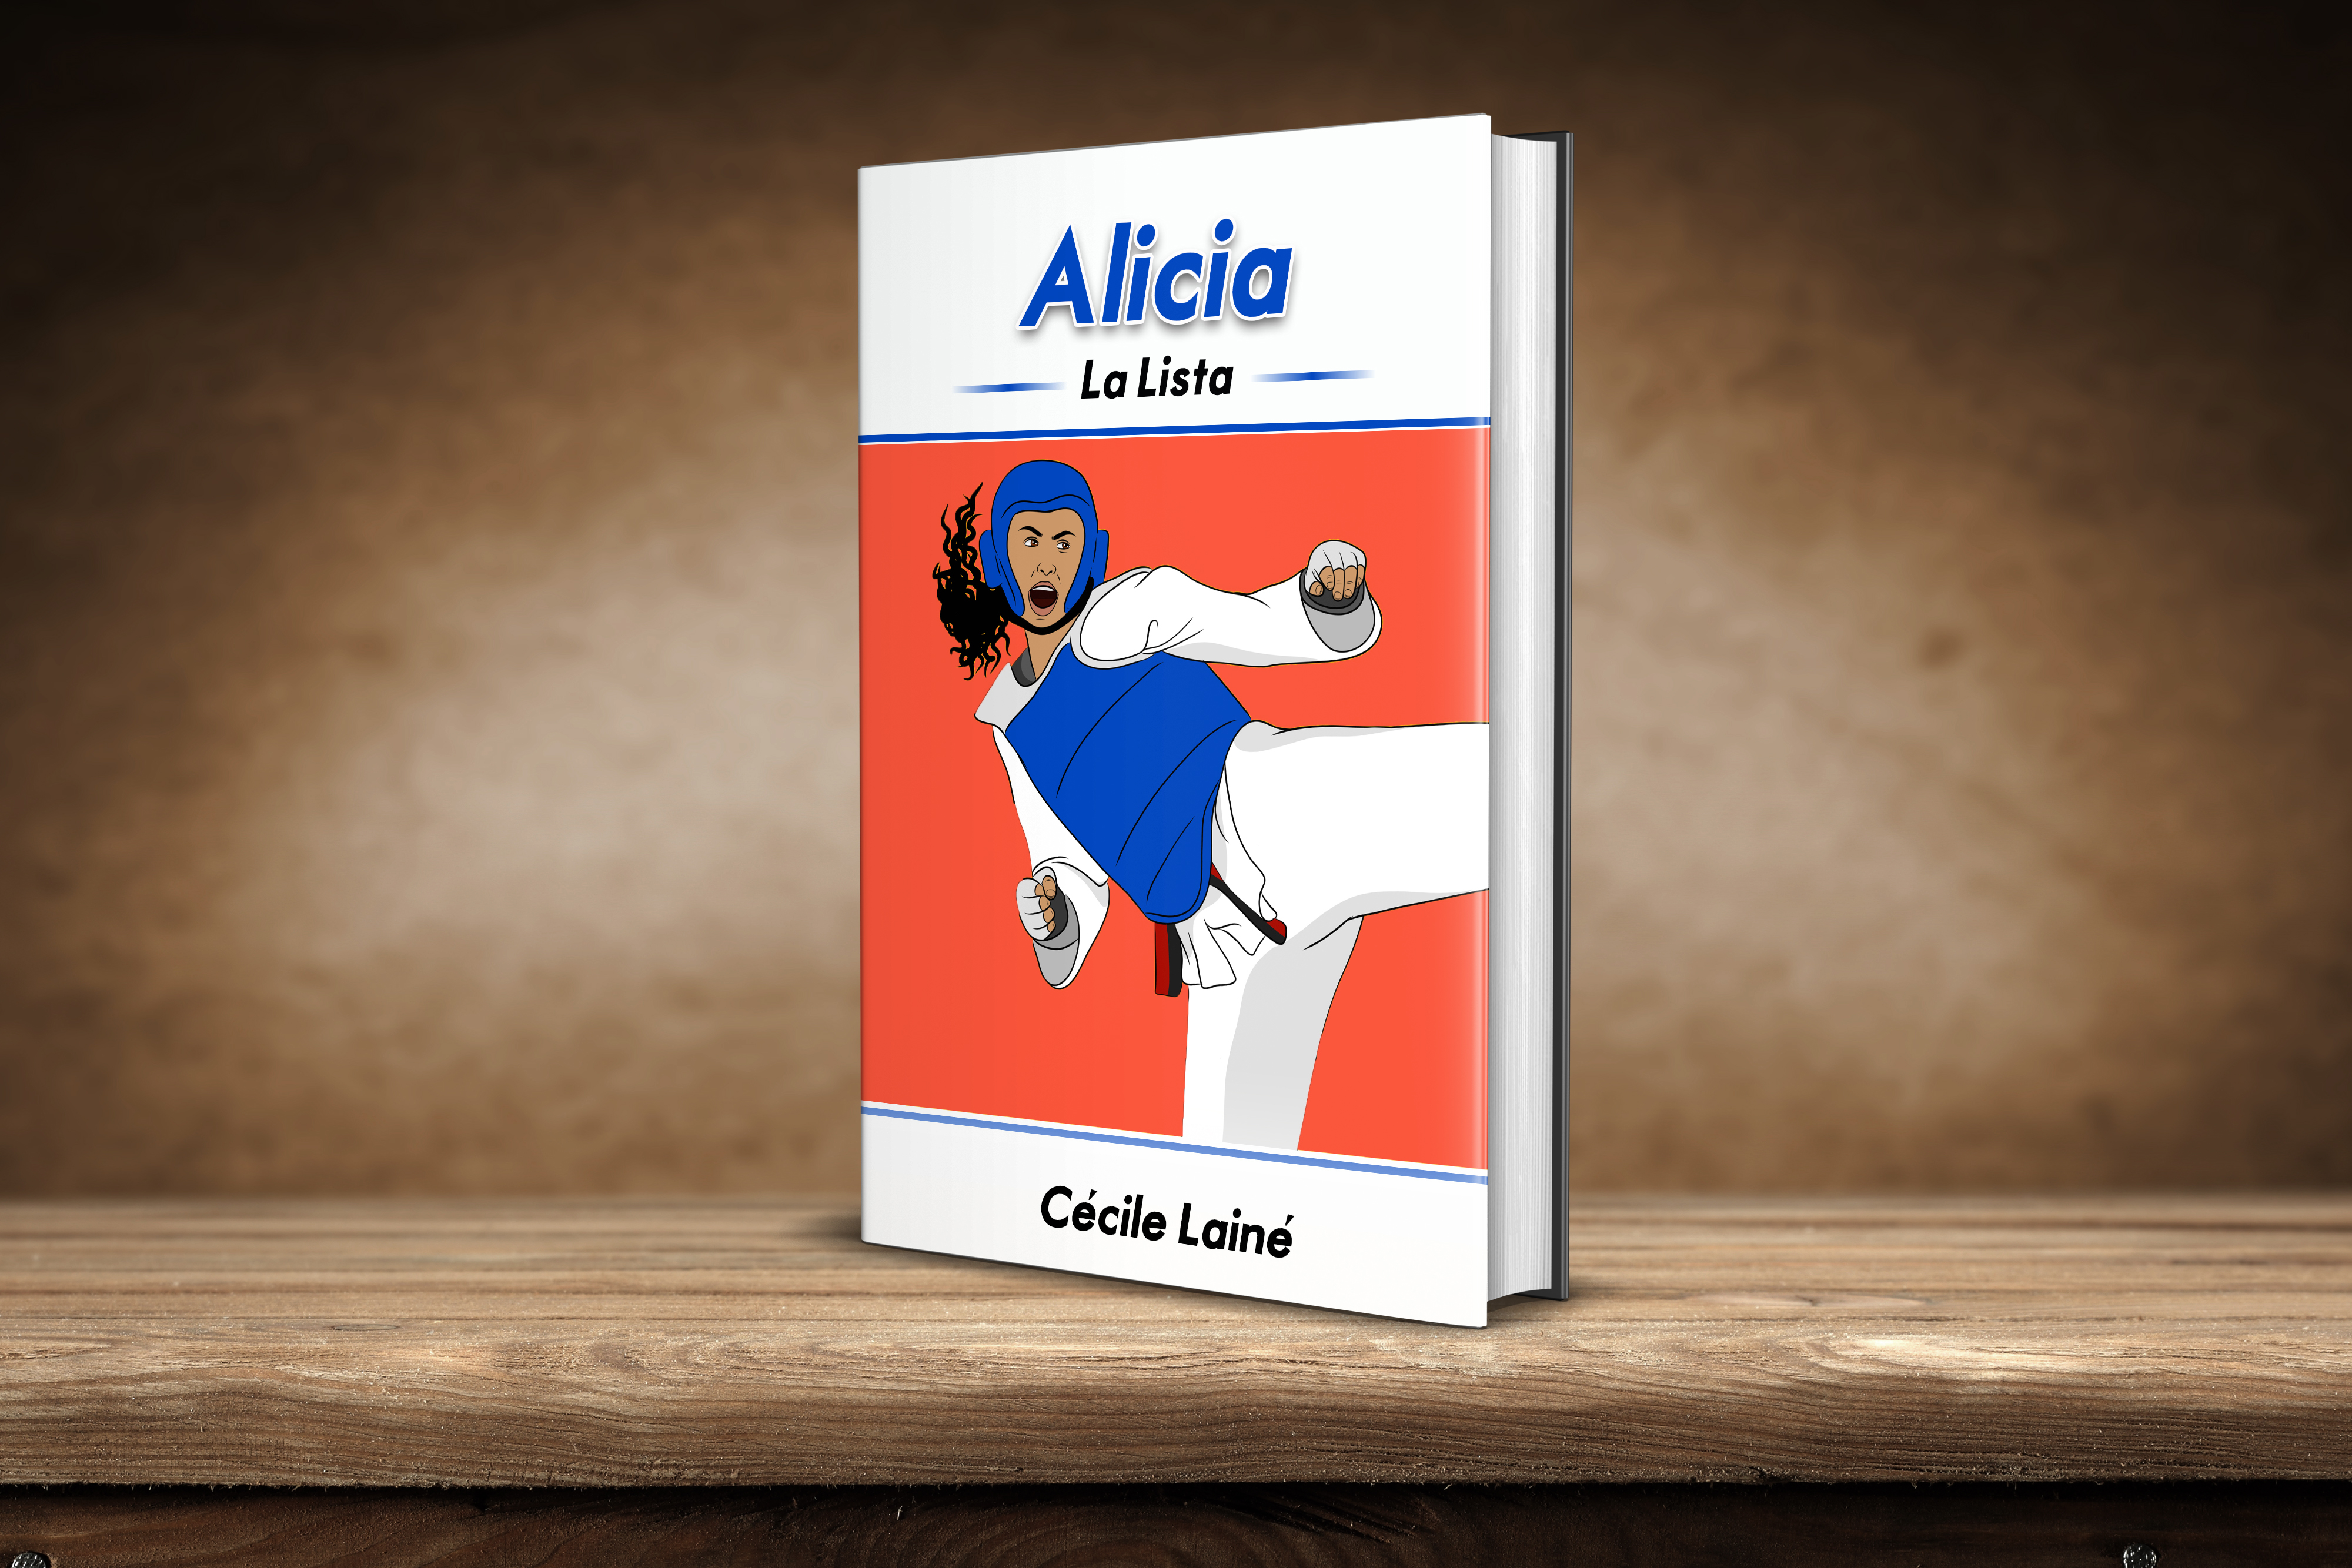 Introducing “Alicia”, a Spanish reader about a girl who kicks…